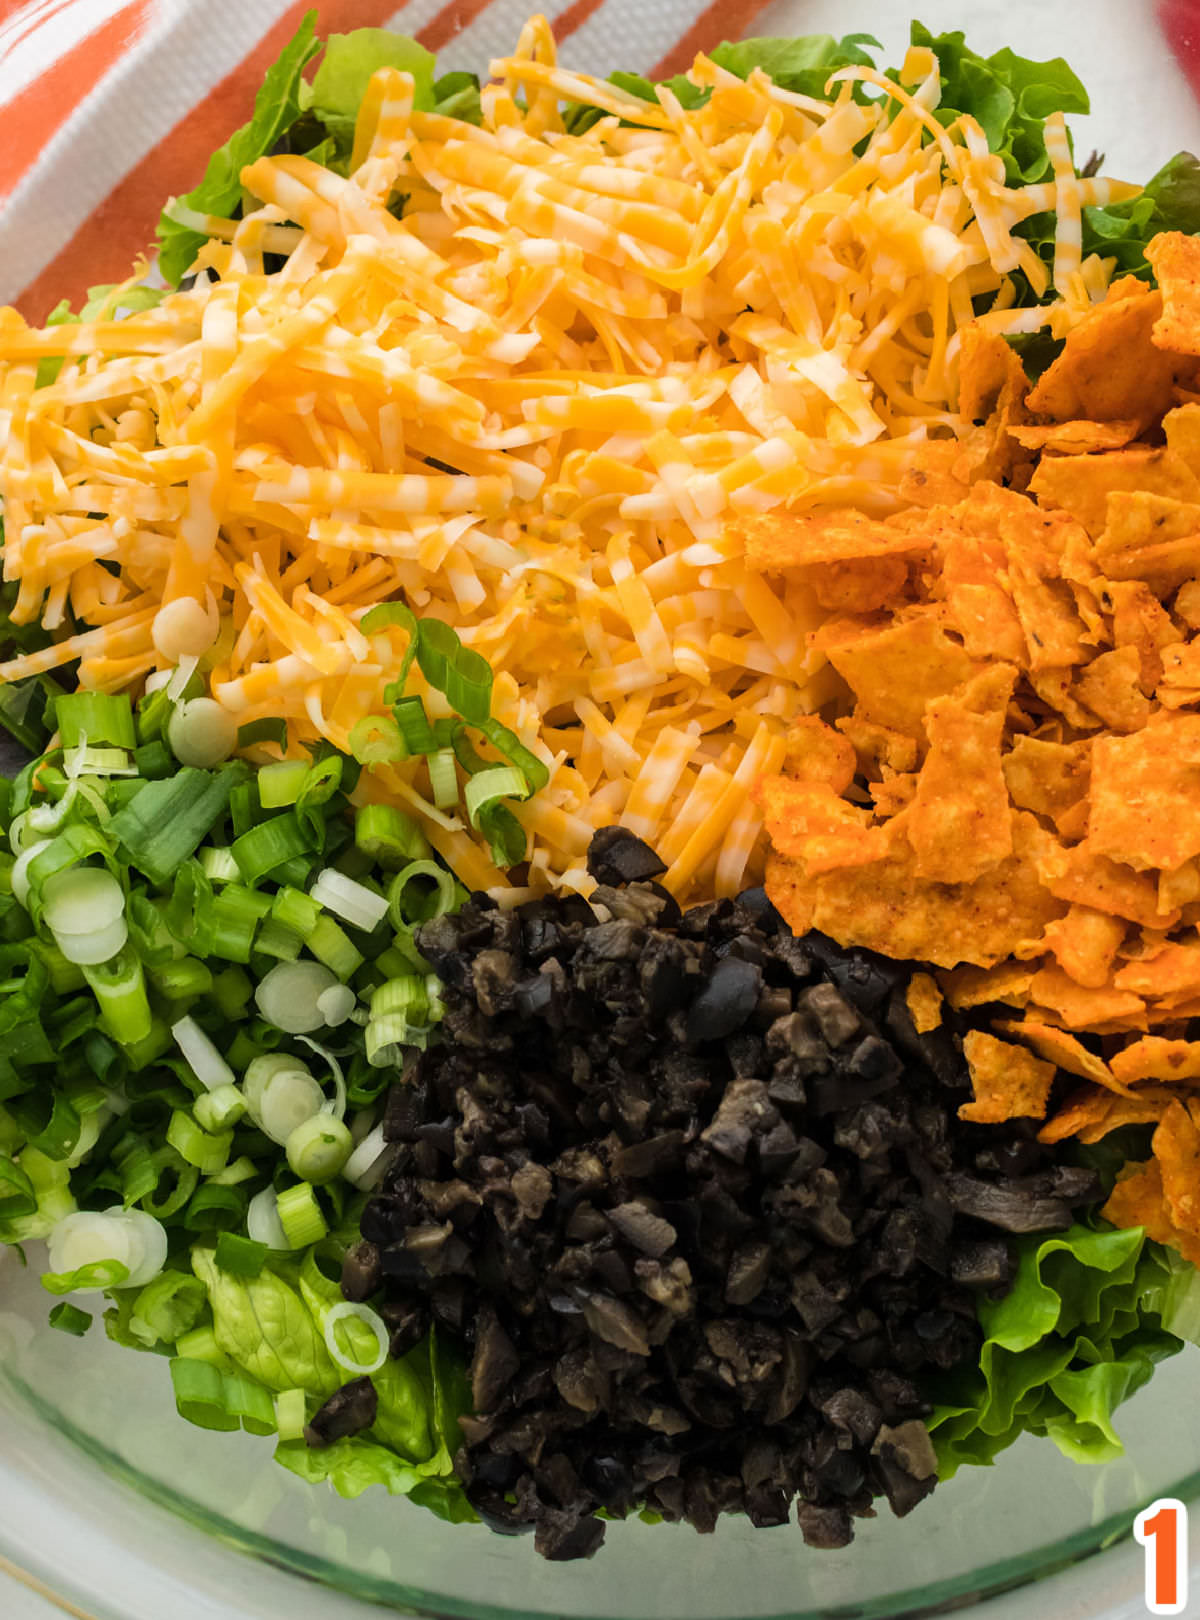 Closeup on a glass bowl filled with the main ingredients of the Dorito Taco Salad including lettuce, grated cheese, Doritos, chopped olives and chopped green onions.